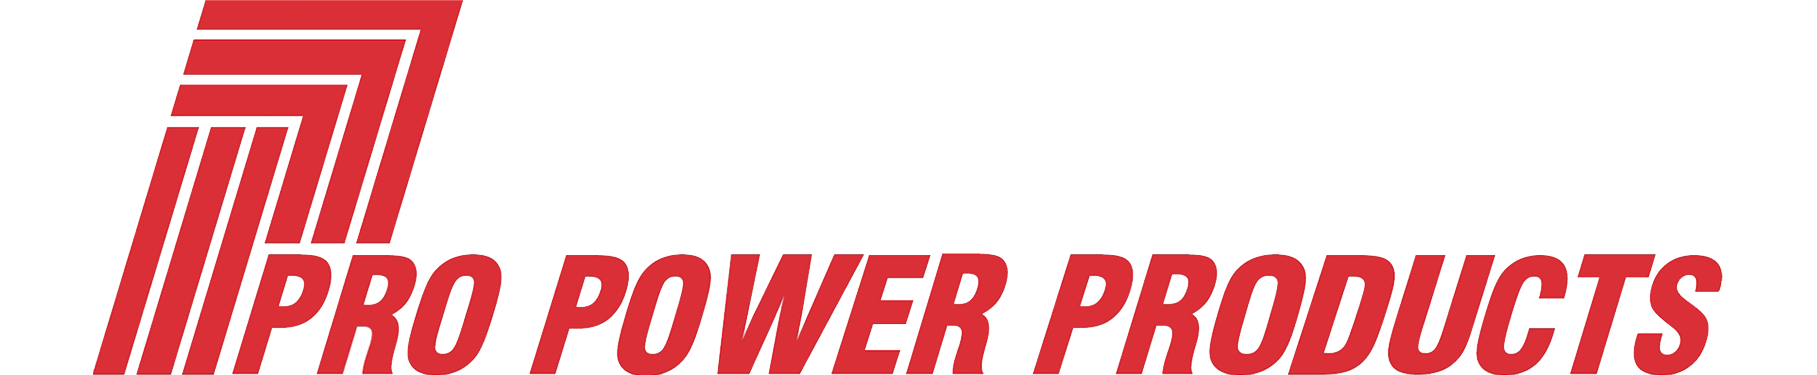 Pro Power Products